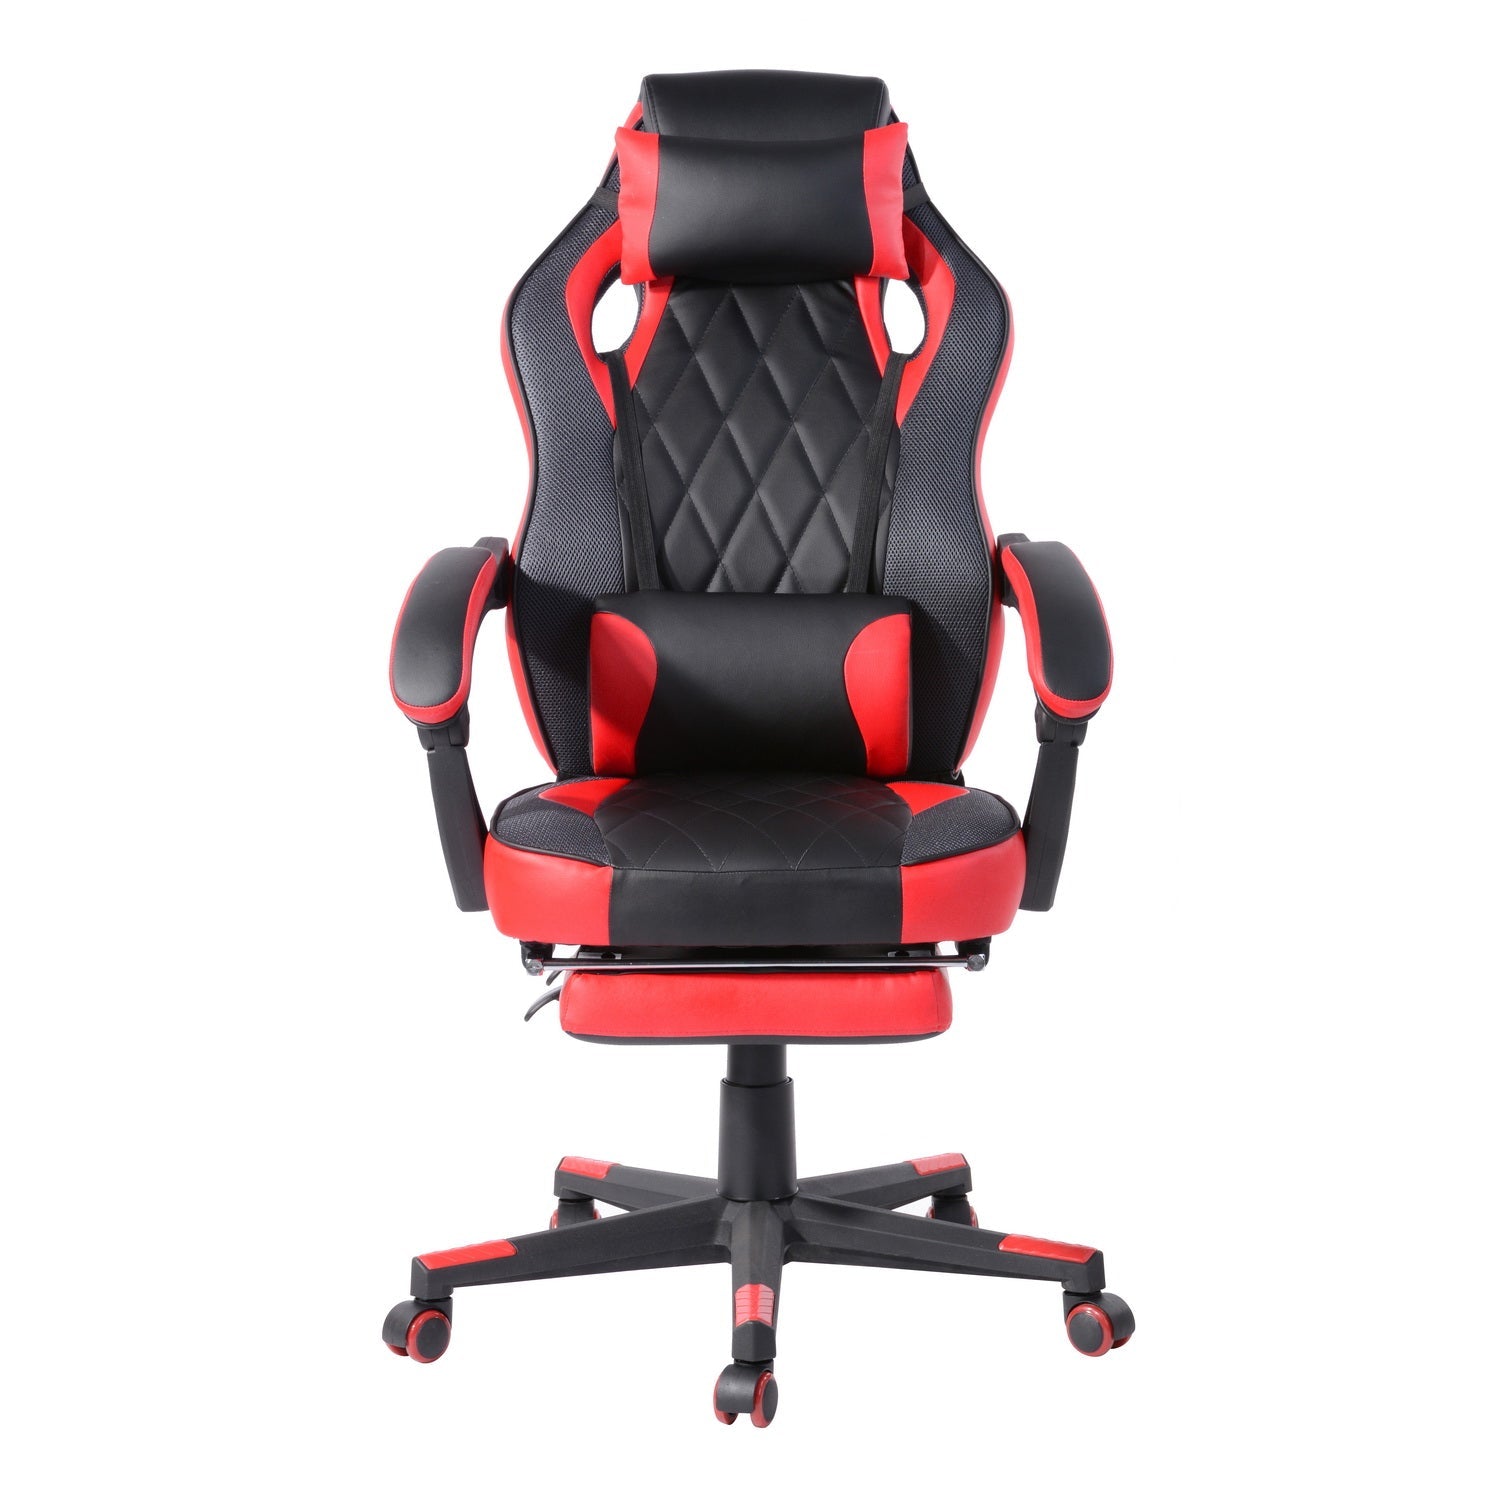 Burgendy Red Game Chairs